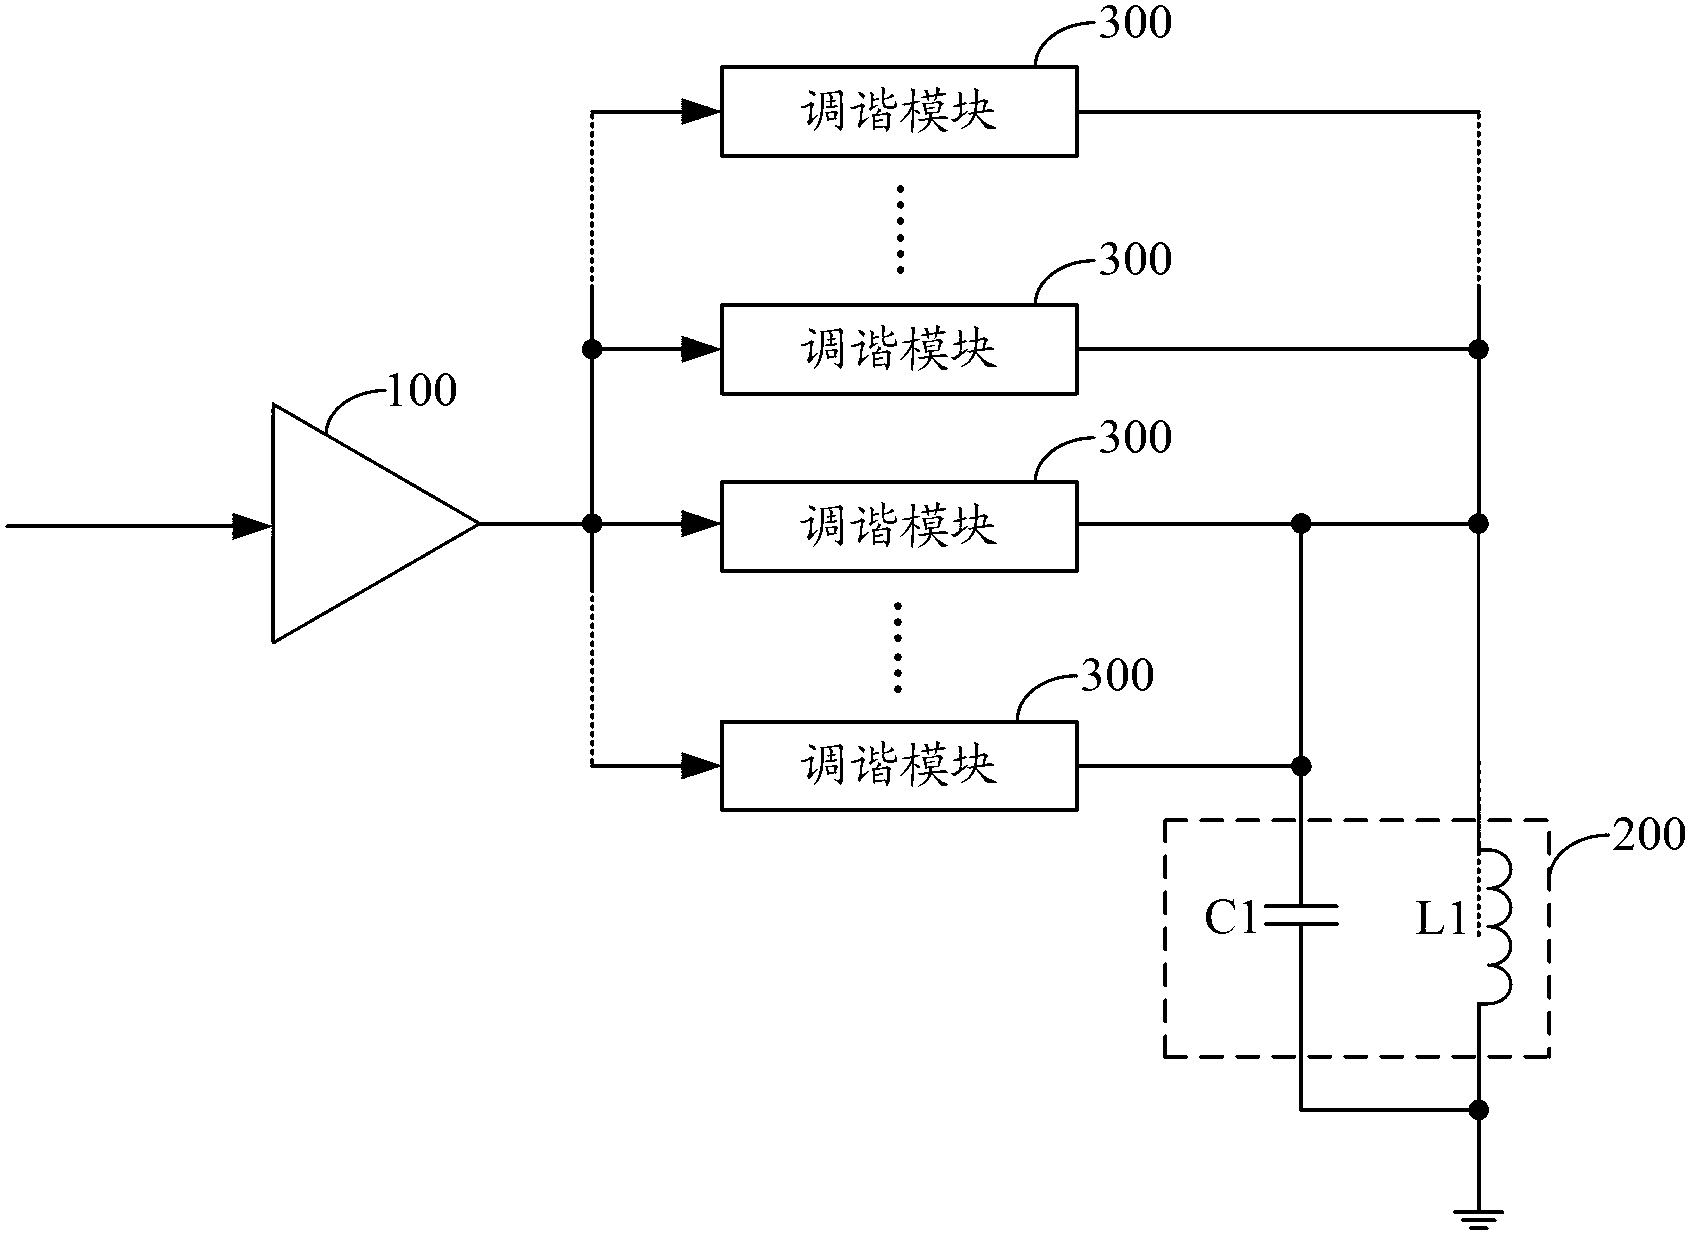 Tuned circuit and near-field payment equipment